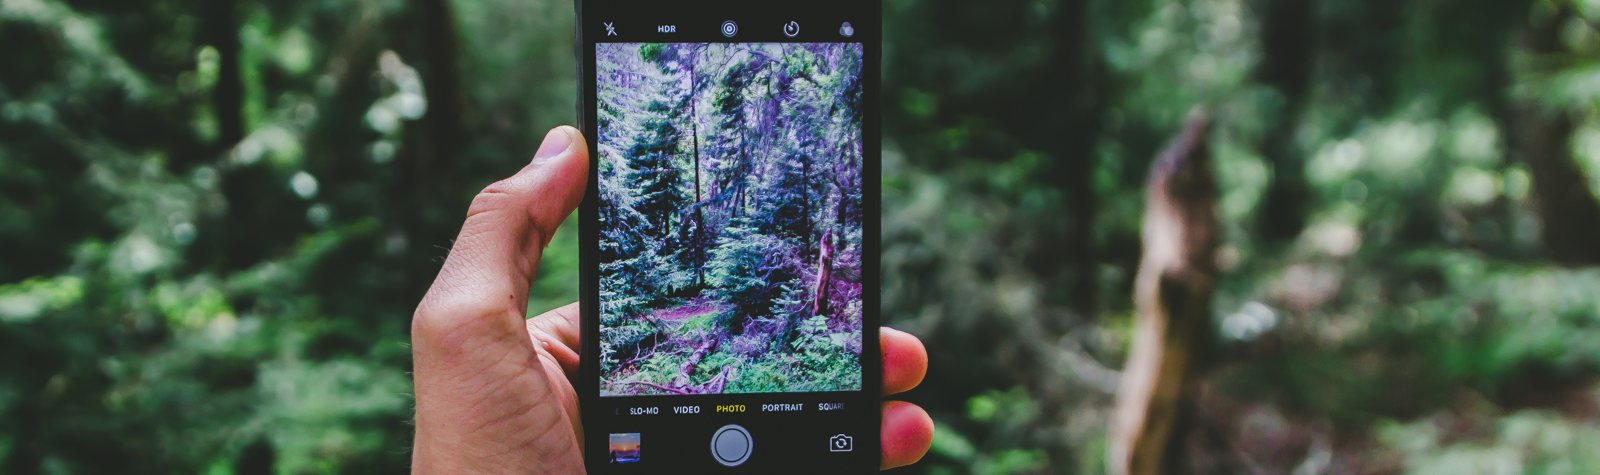 Impress Your Loved Ones With Better Photos